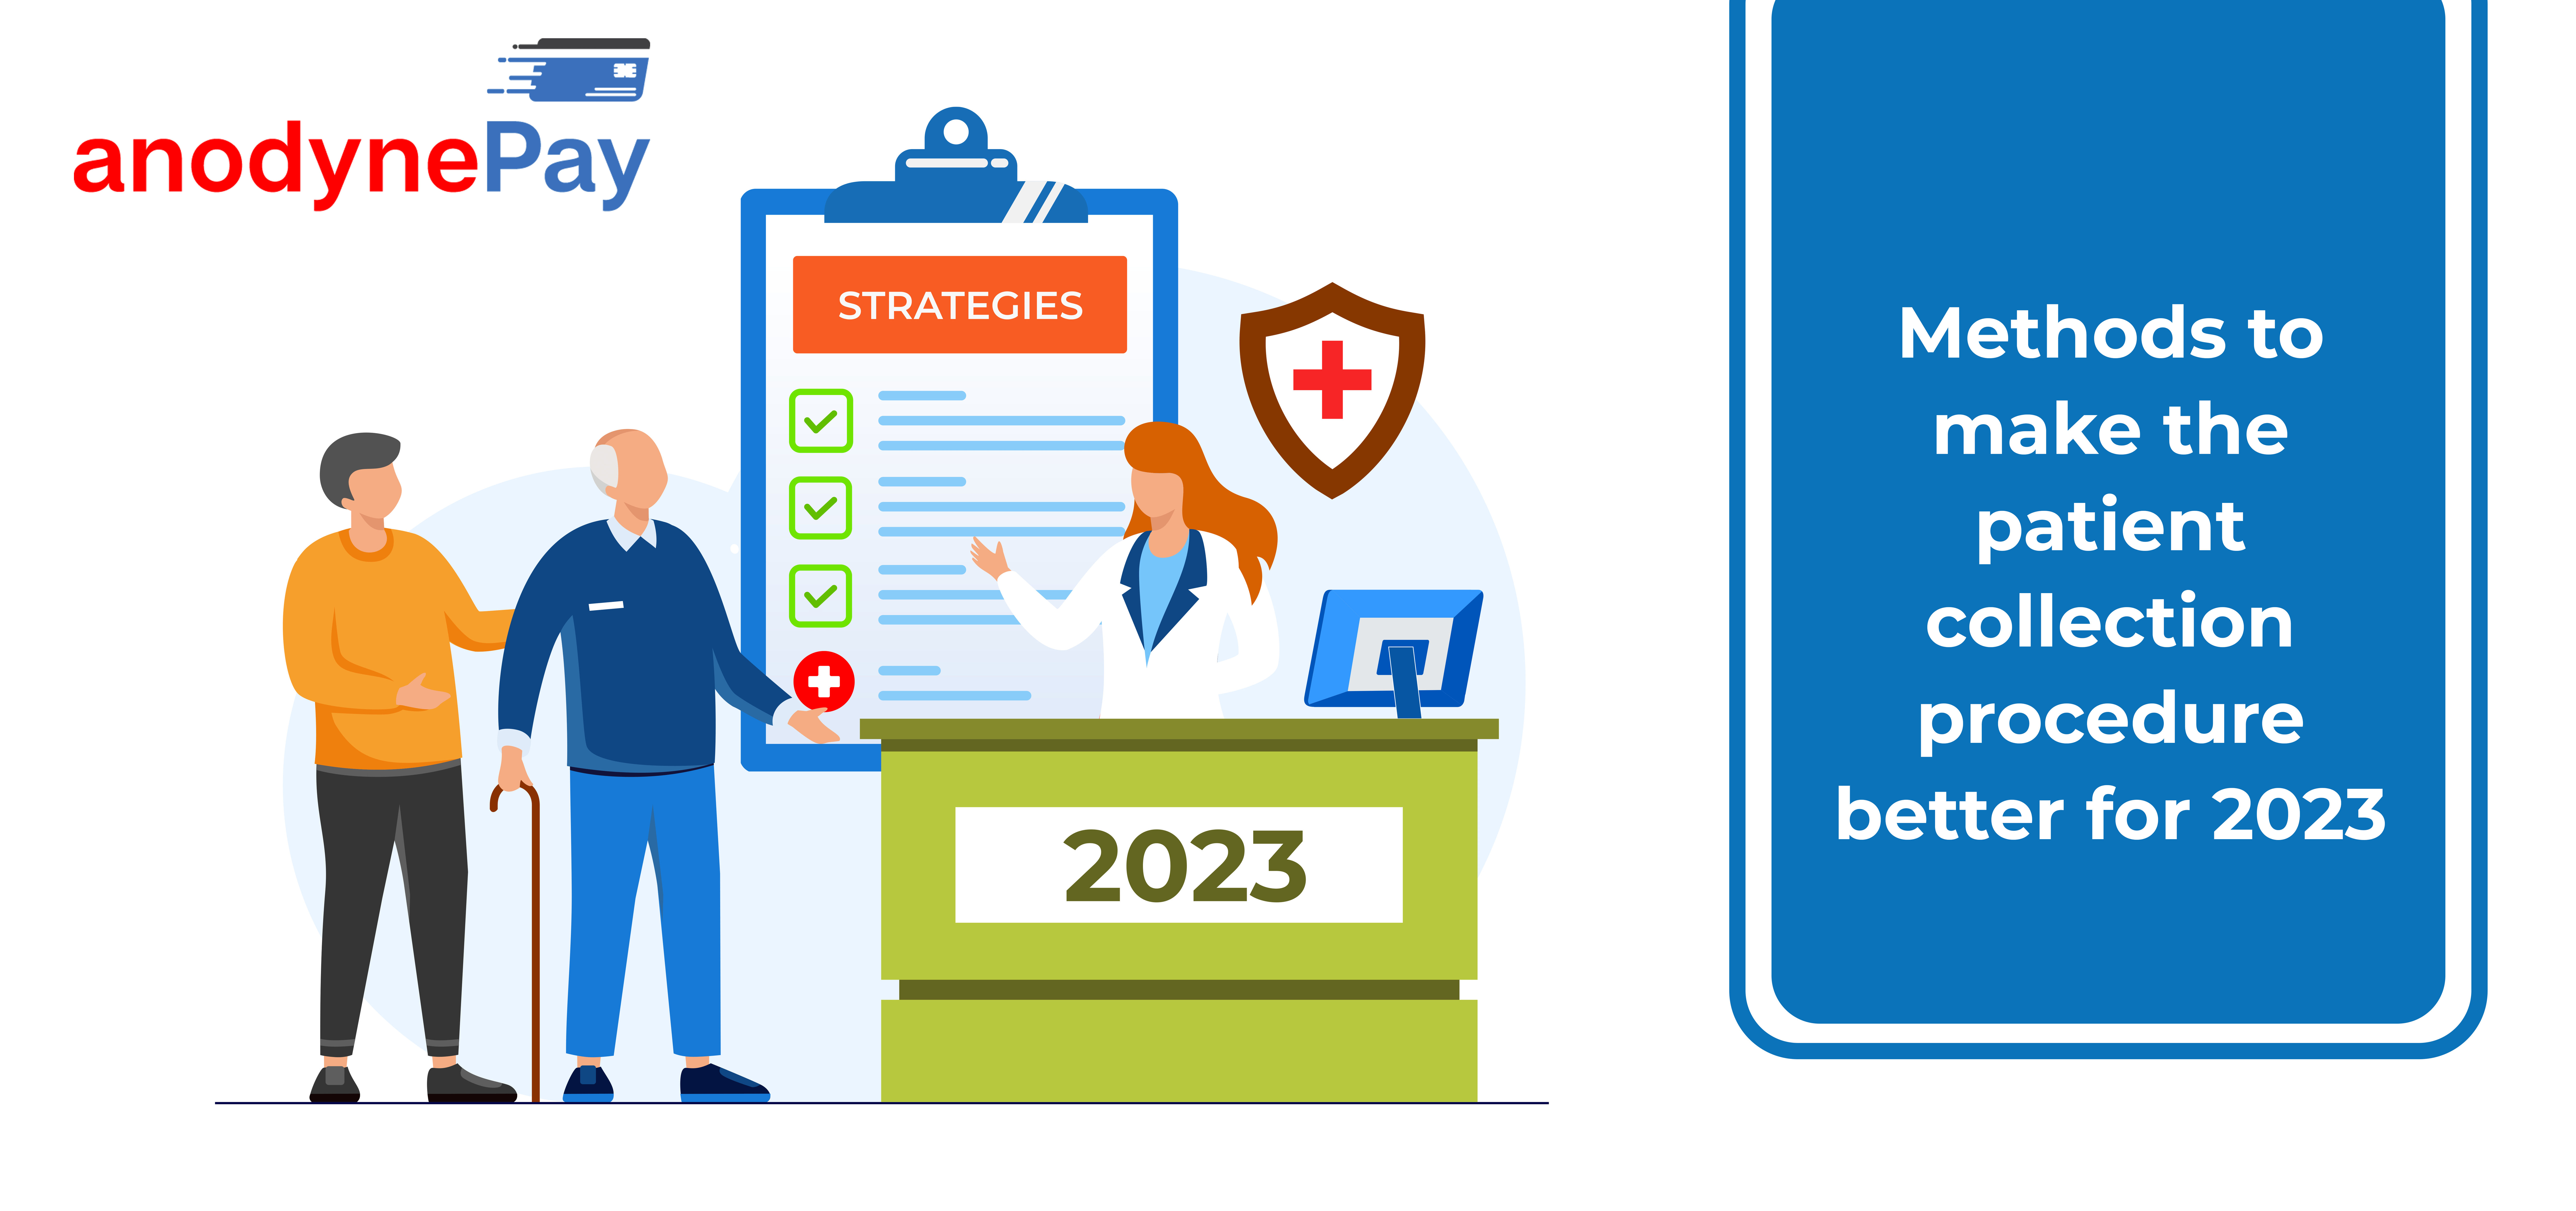 Methods to make the patient collection procedure better for 2023